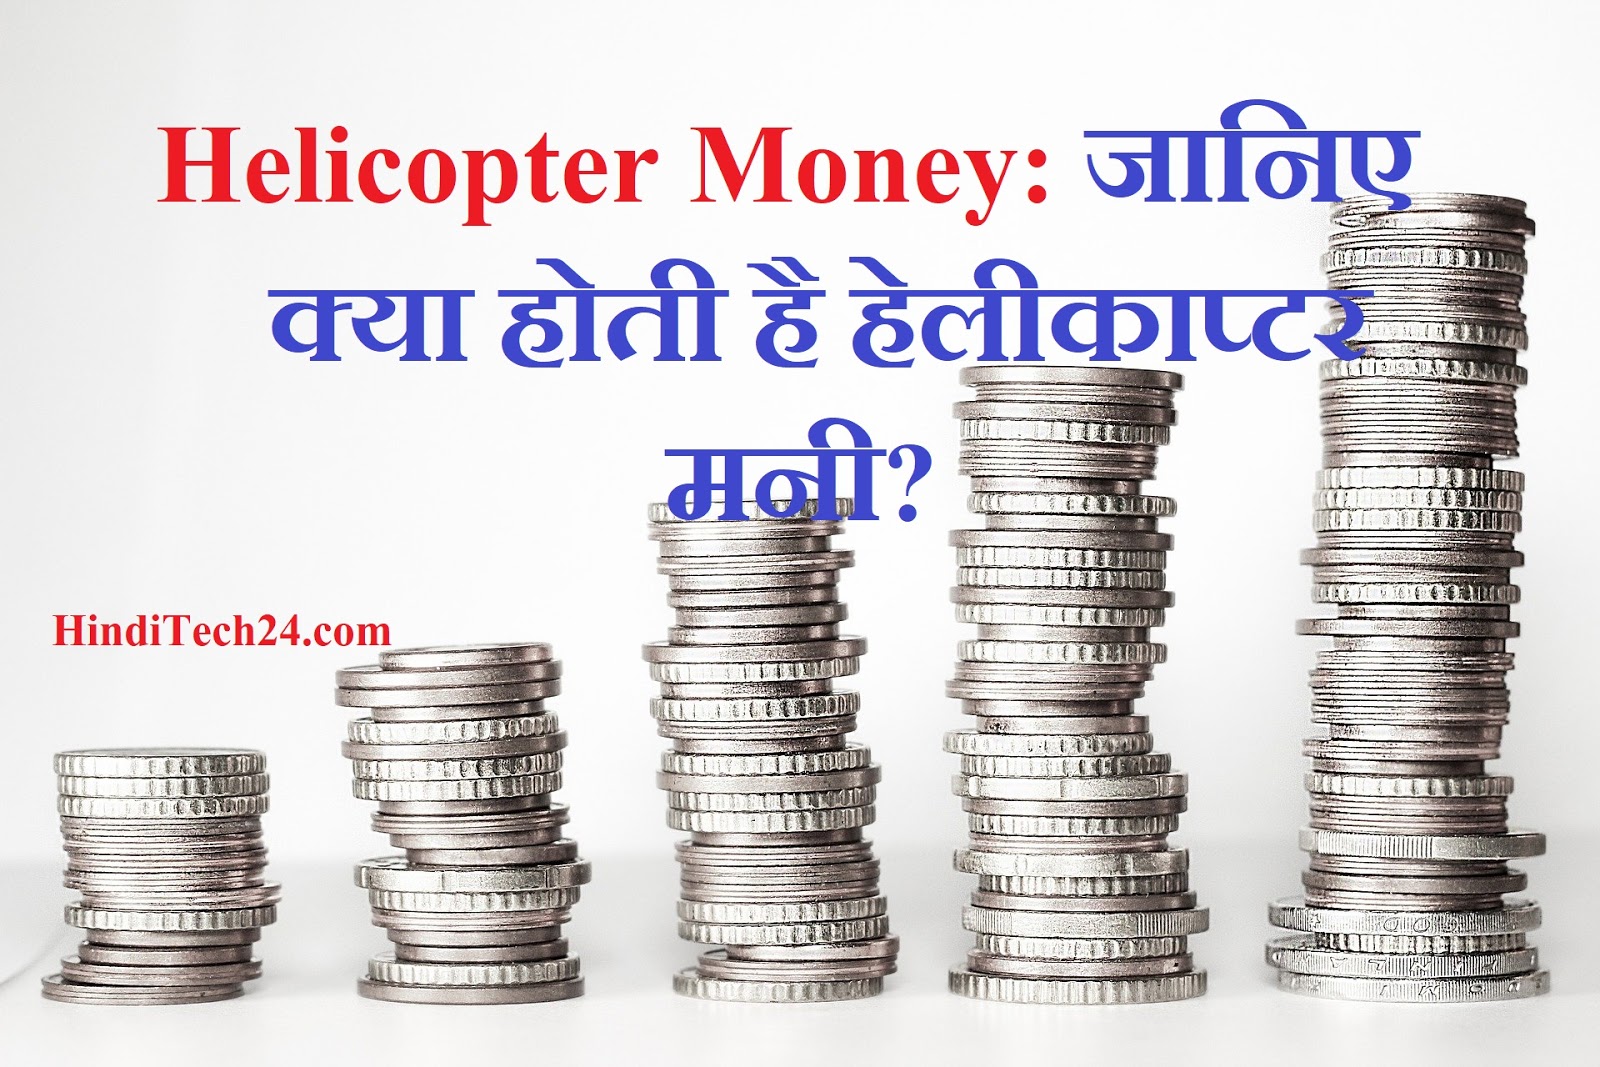 What is Helicopter Money?